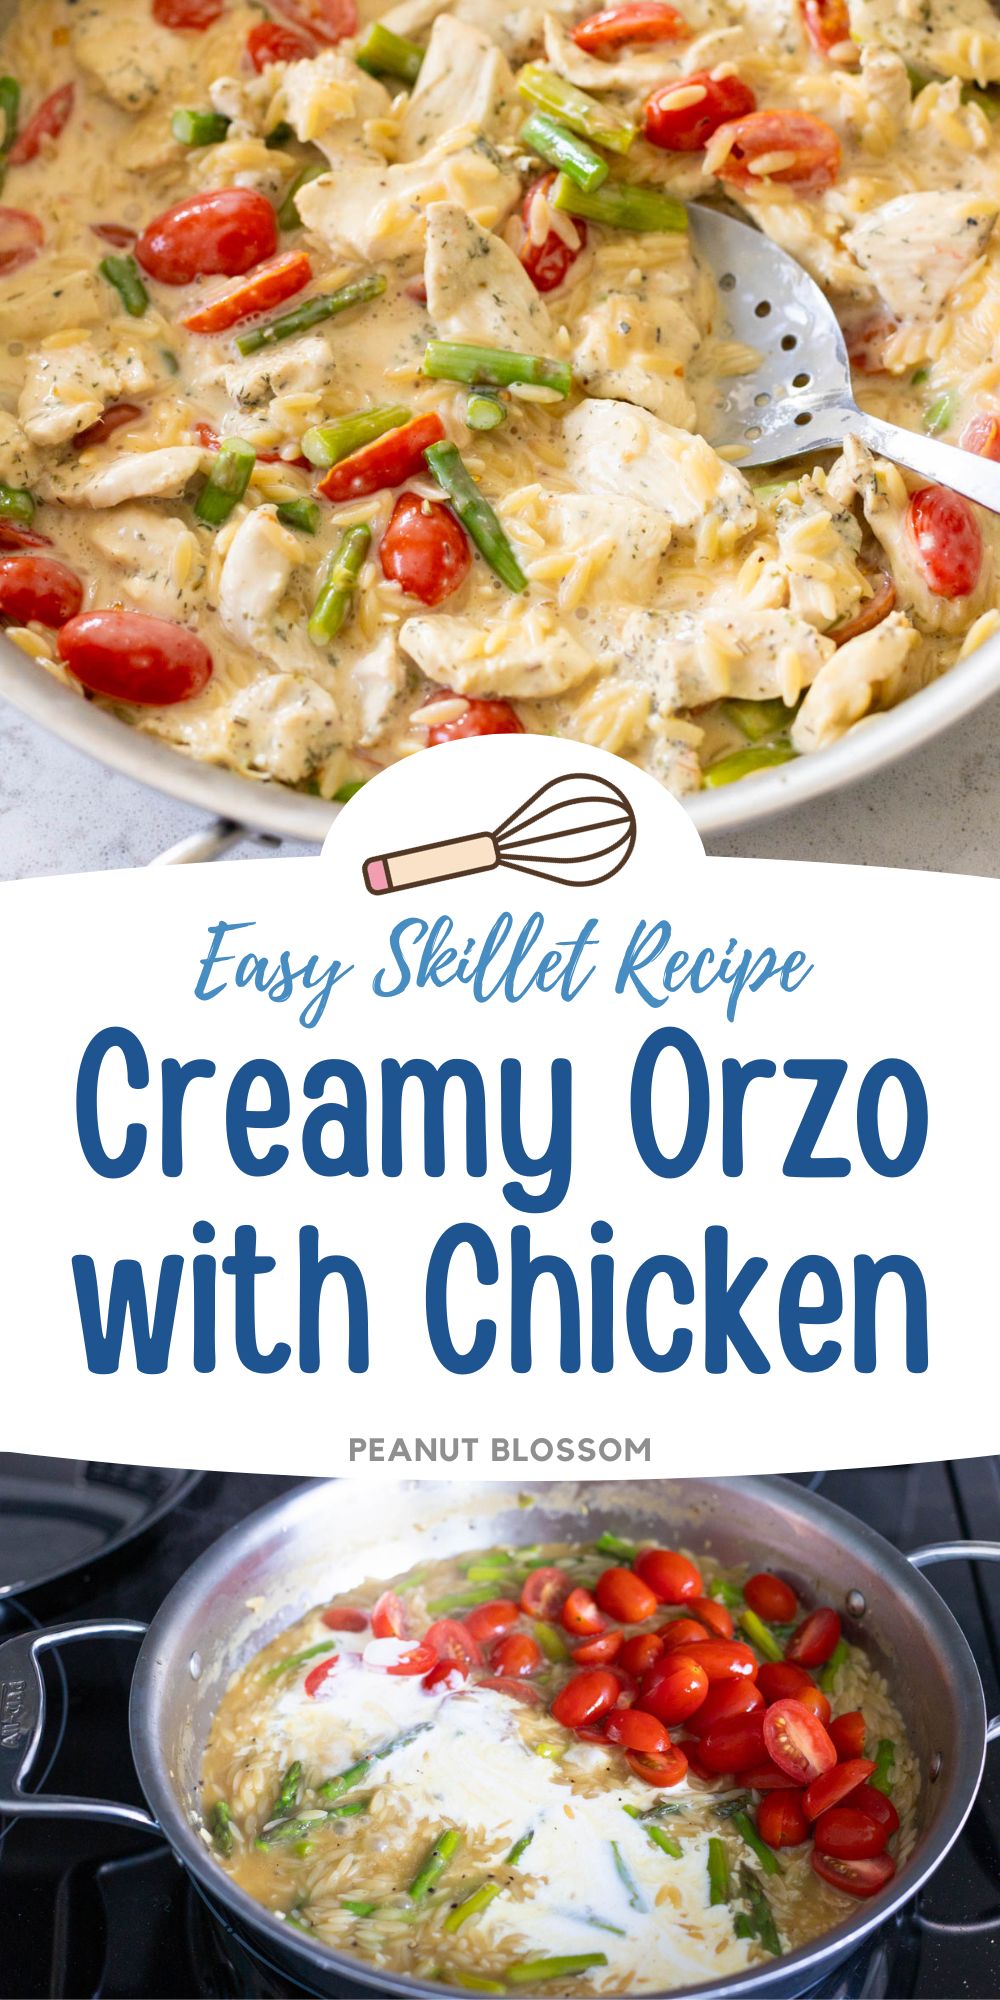 The photo collage shows the finished creamy orzo next to a photo of the skillet filled with heavy cream, cherry tomatoes, asparagus spears, and chicken stock. 